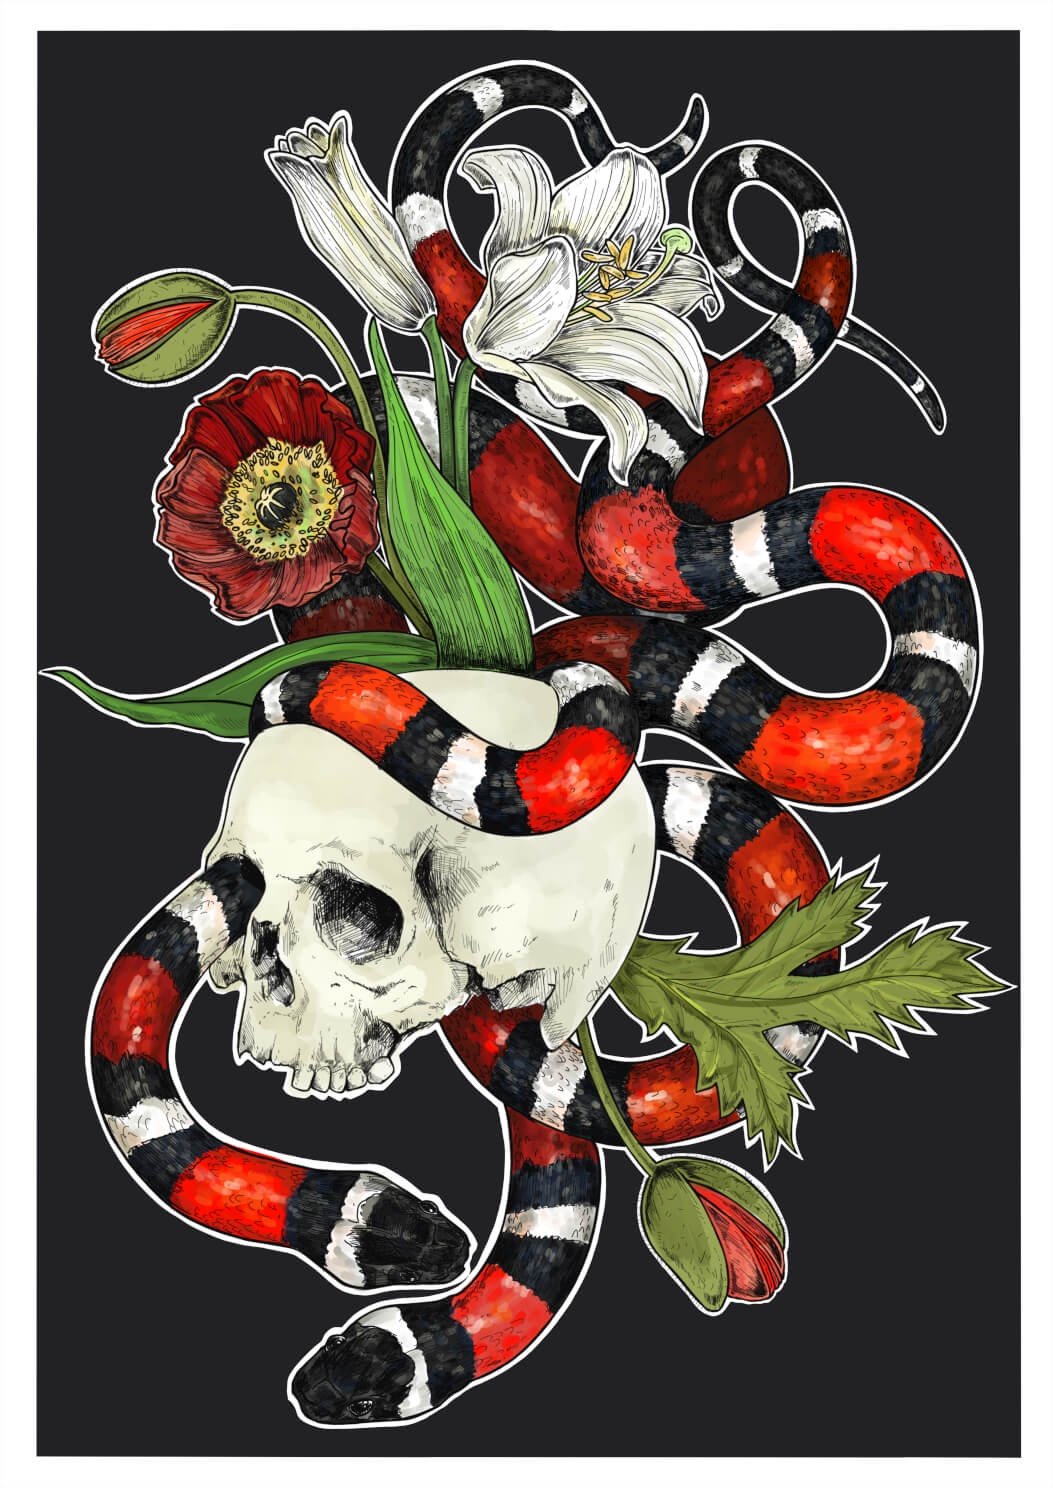 Snakes Of Creation - Death A3 Print